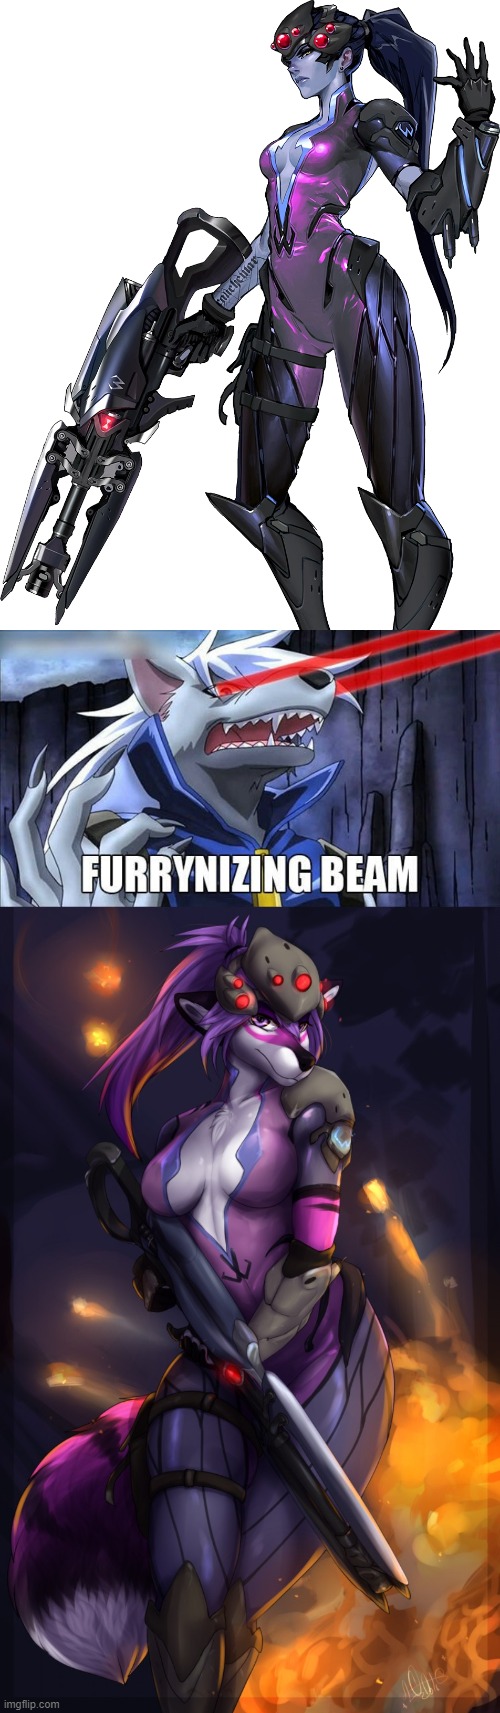 For some reason that fits too well xD (By Omesore) | image tagged in furrynizing beam,furry,overwatch,widowmaker,memes | made w/ Imgflip meme maker